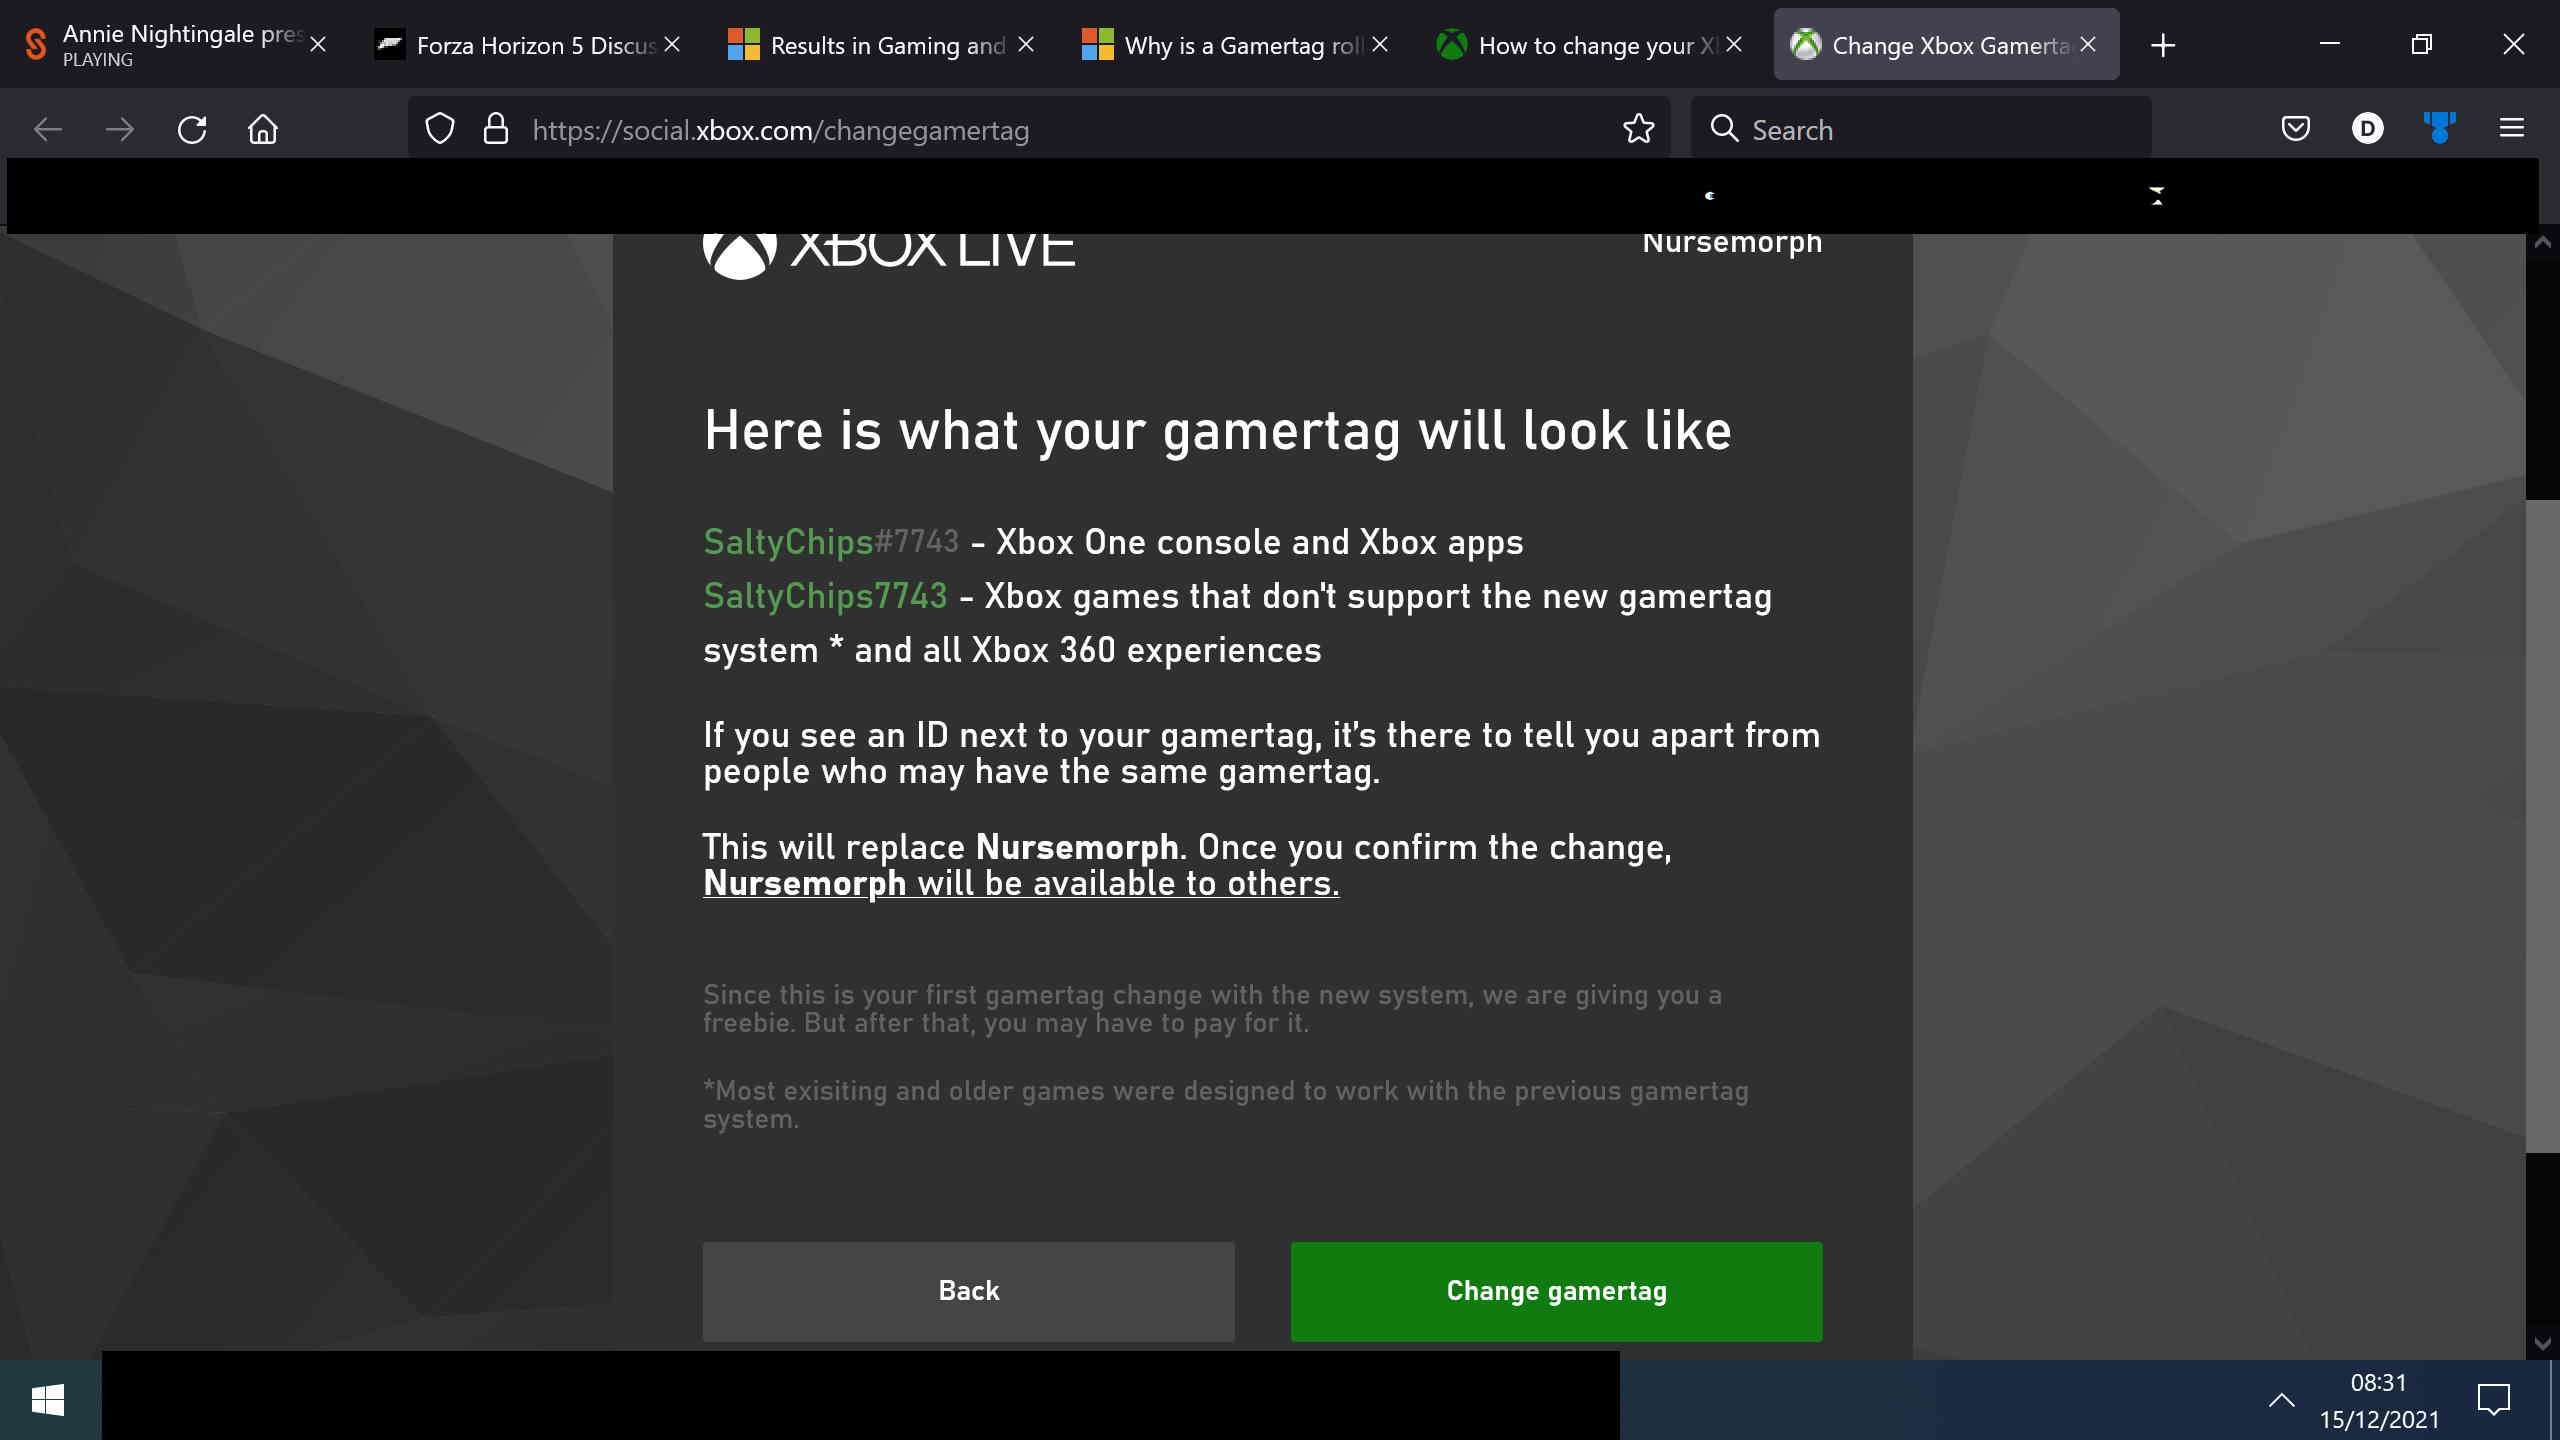 How to find a person's gamertag on Xbox by their old gamertag - Quora